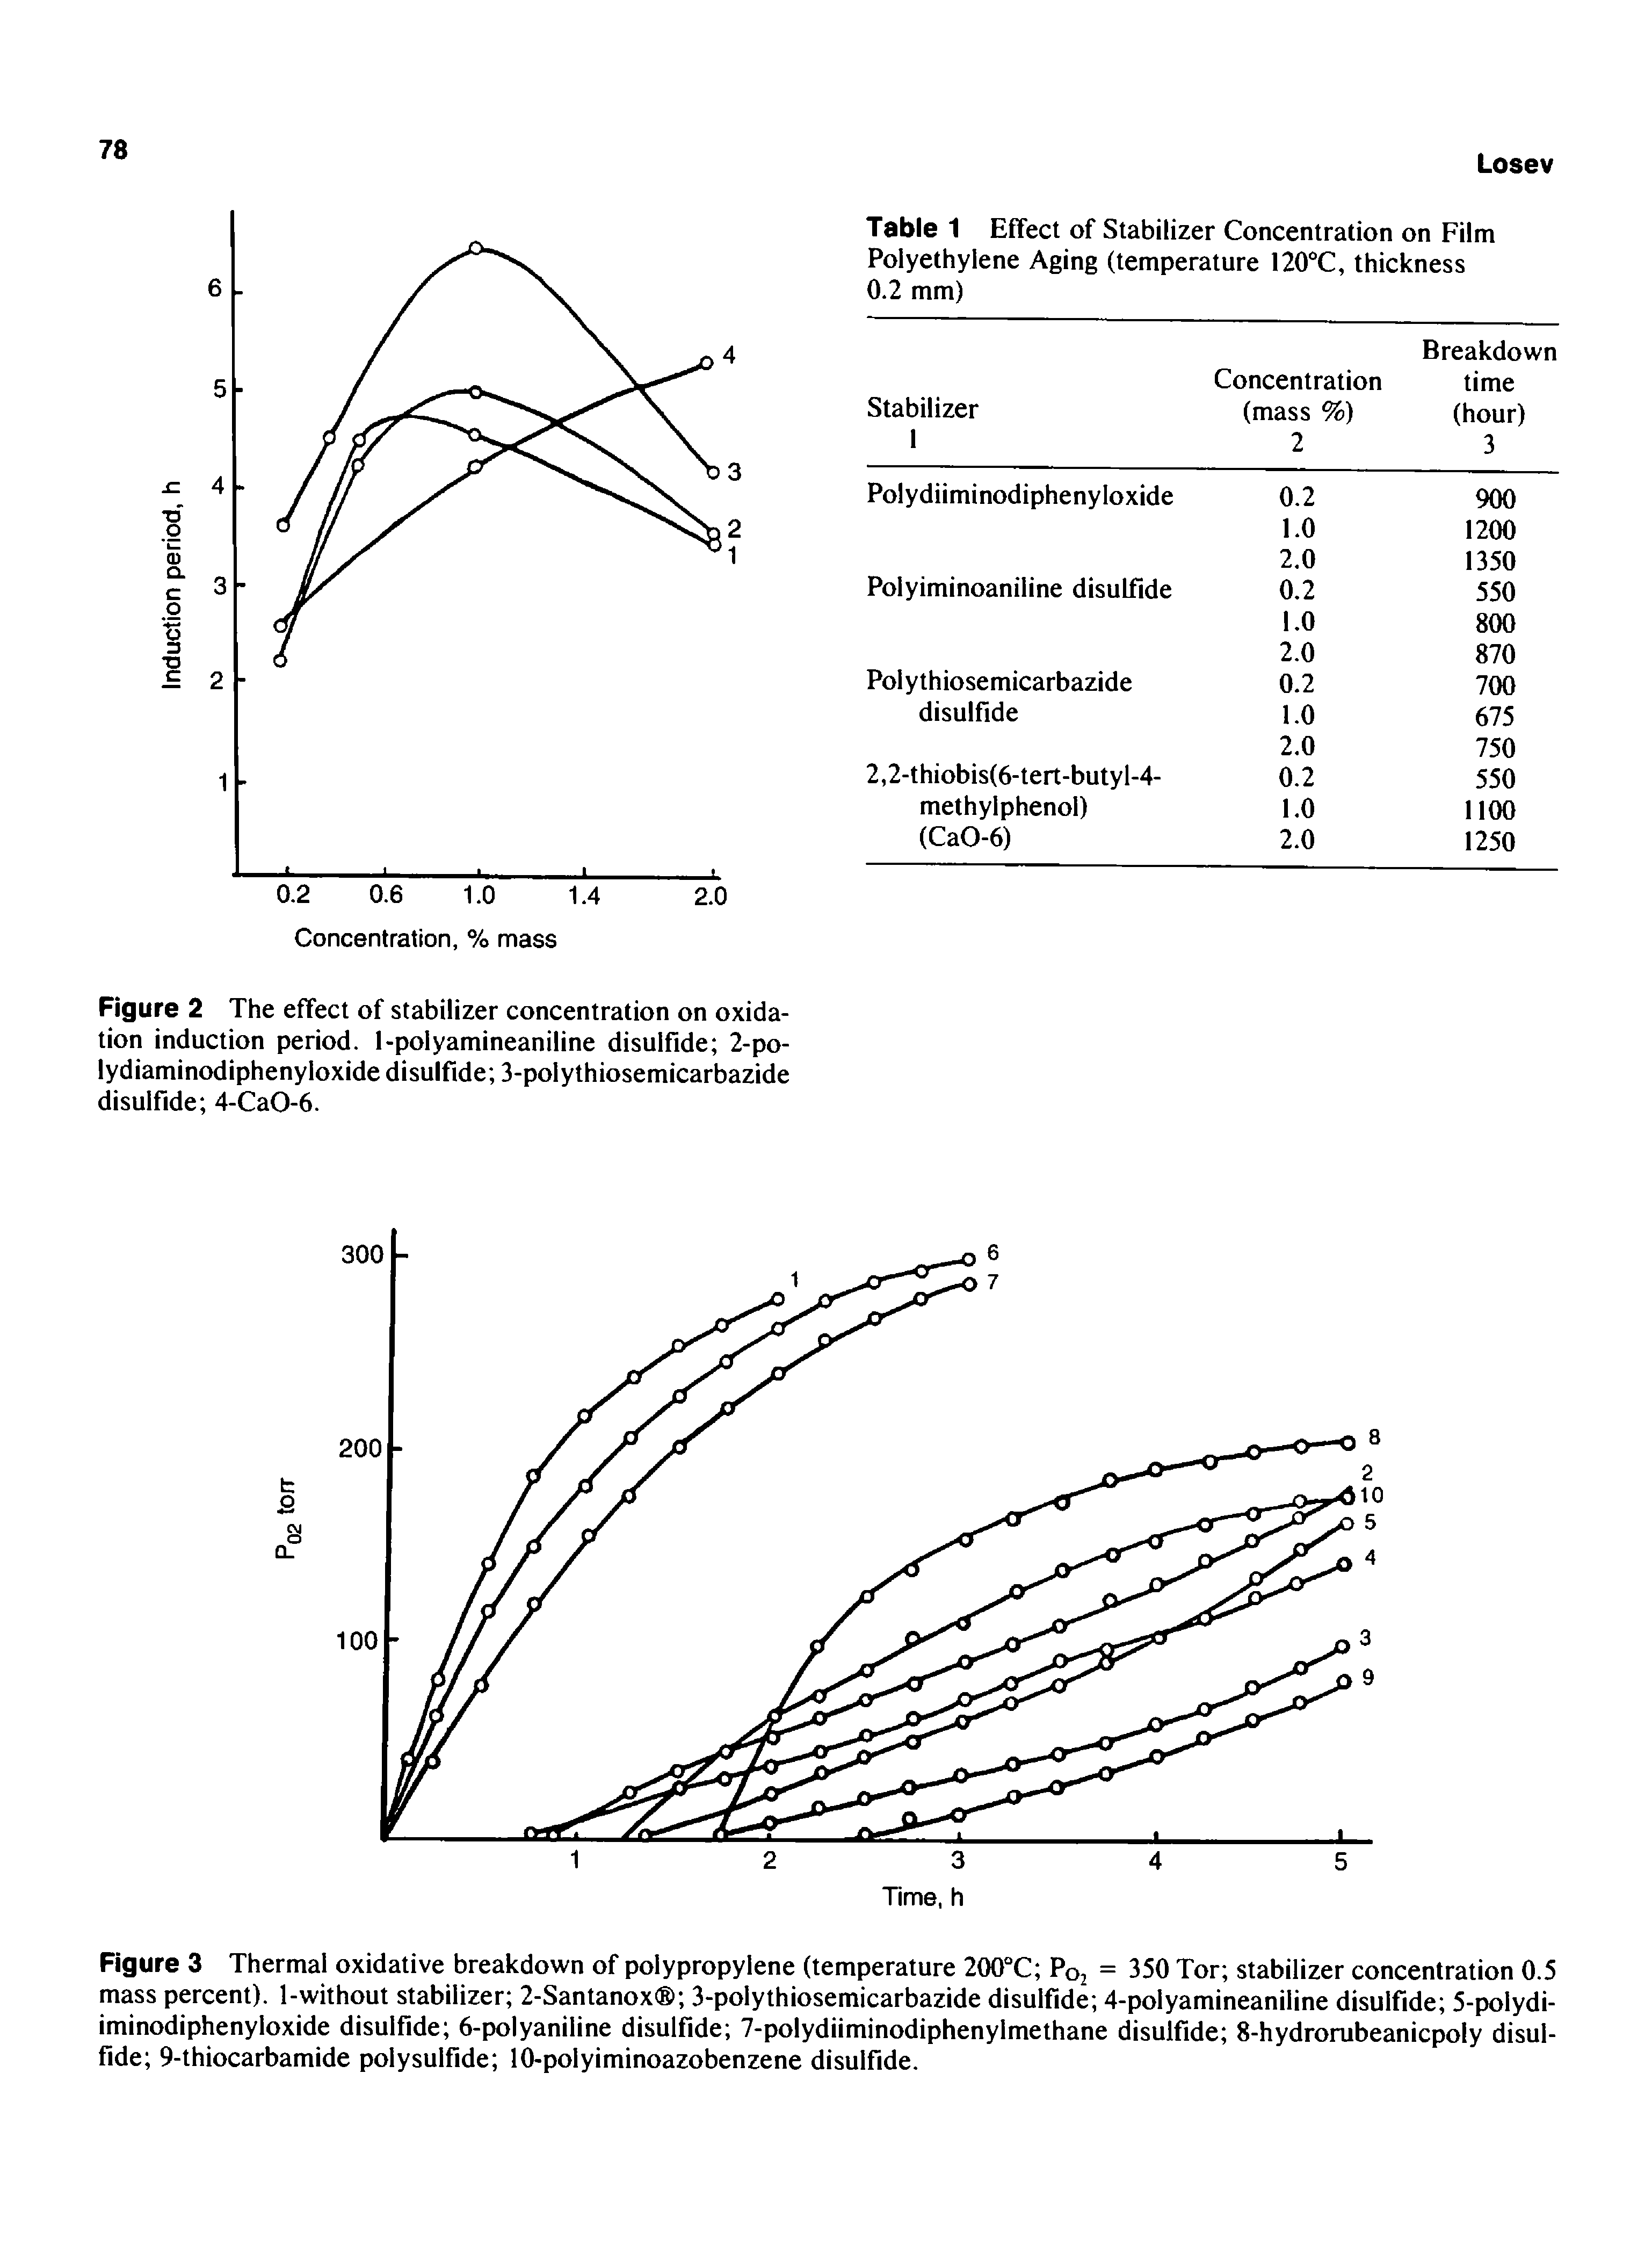 Table 1 Effect of Stabilizer Concentration on Film Polyethylene Aging (temperature 120 C, thickness 0.2 mm)...